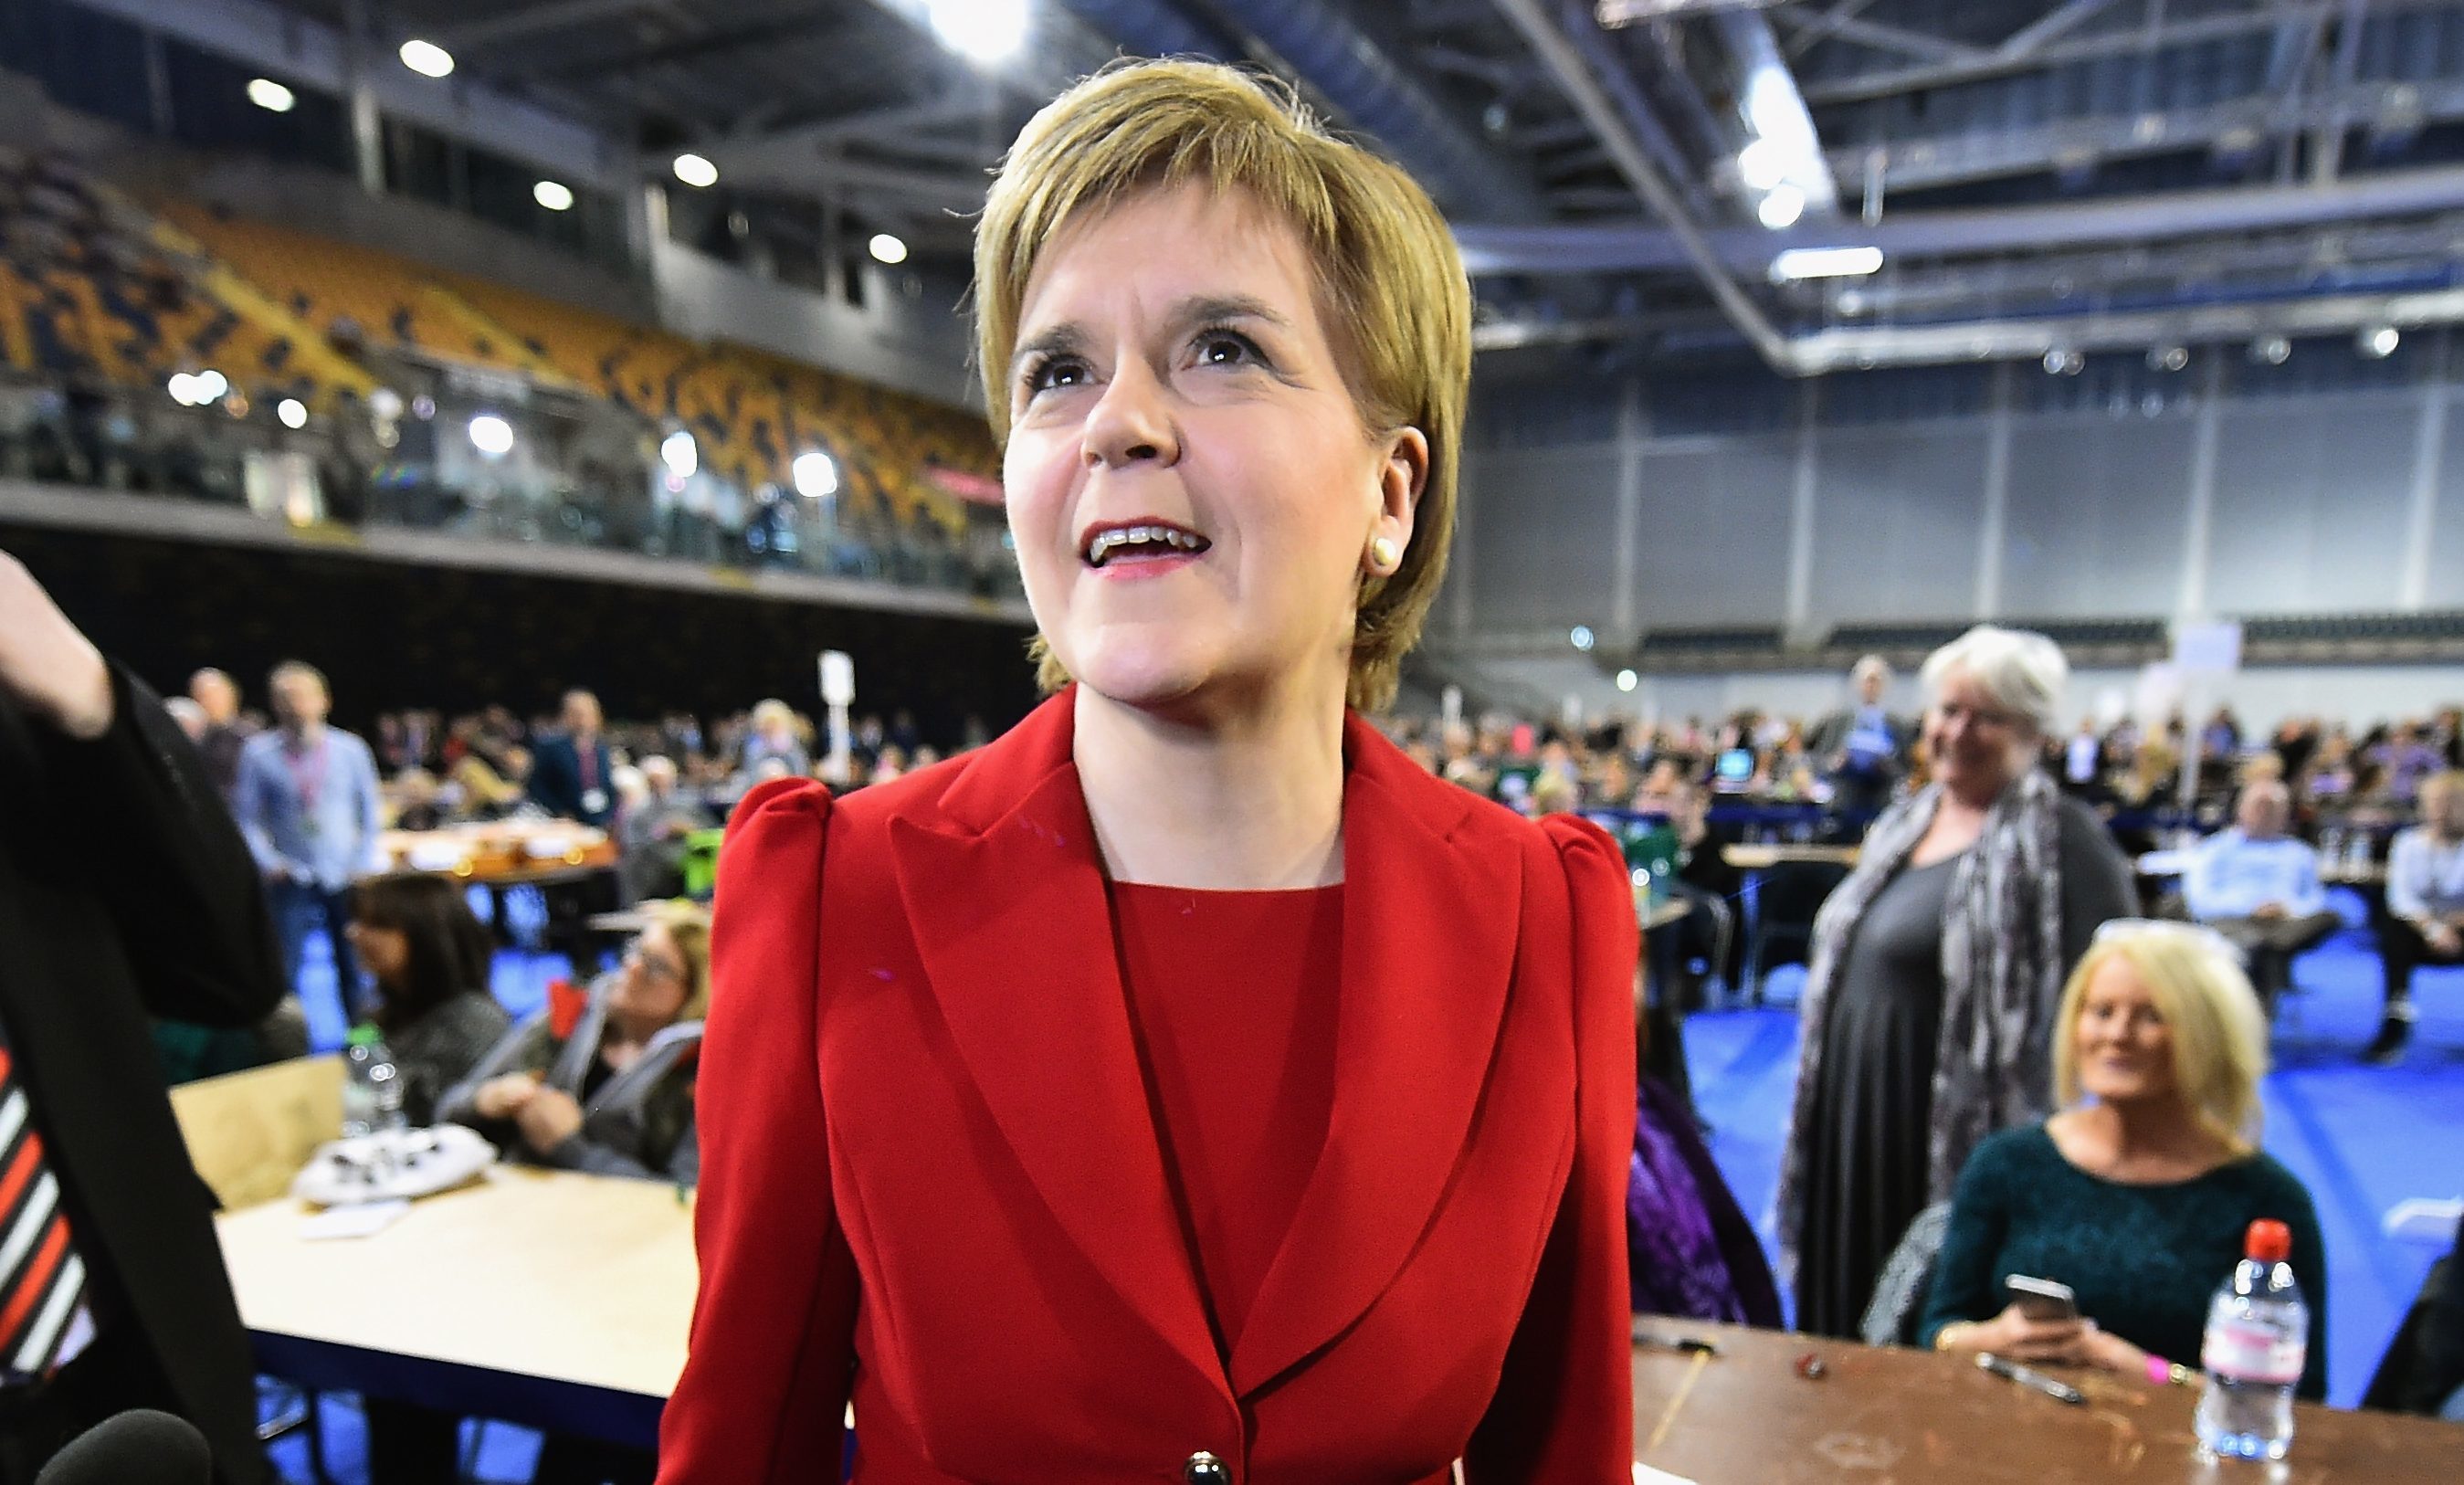 SNP leader Nicola Sturgeon has declared victory and is waiting to see if her party has secured another majority.